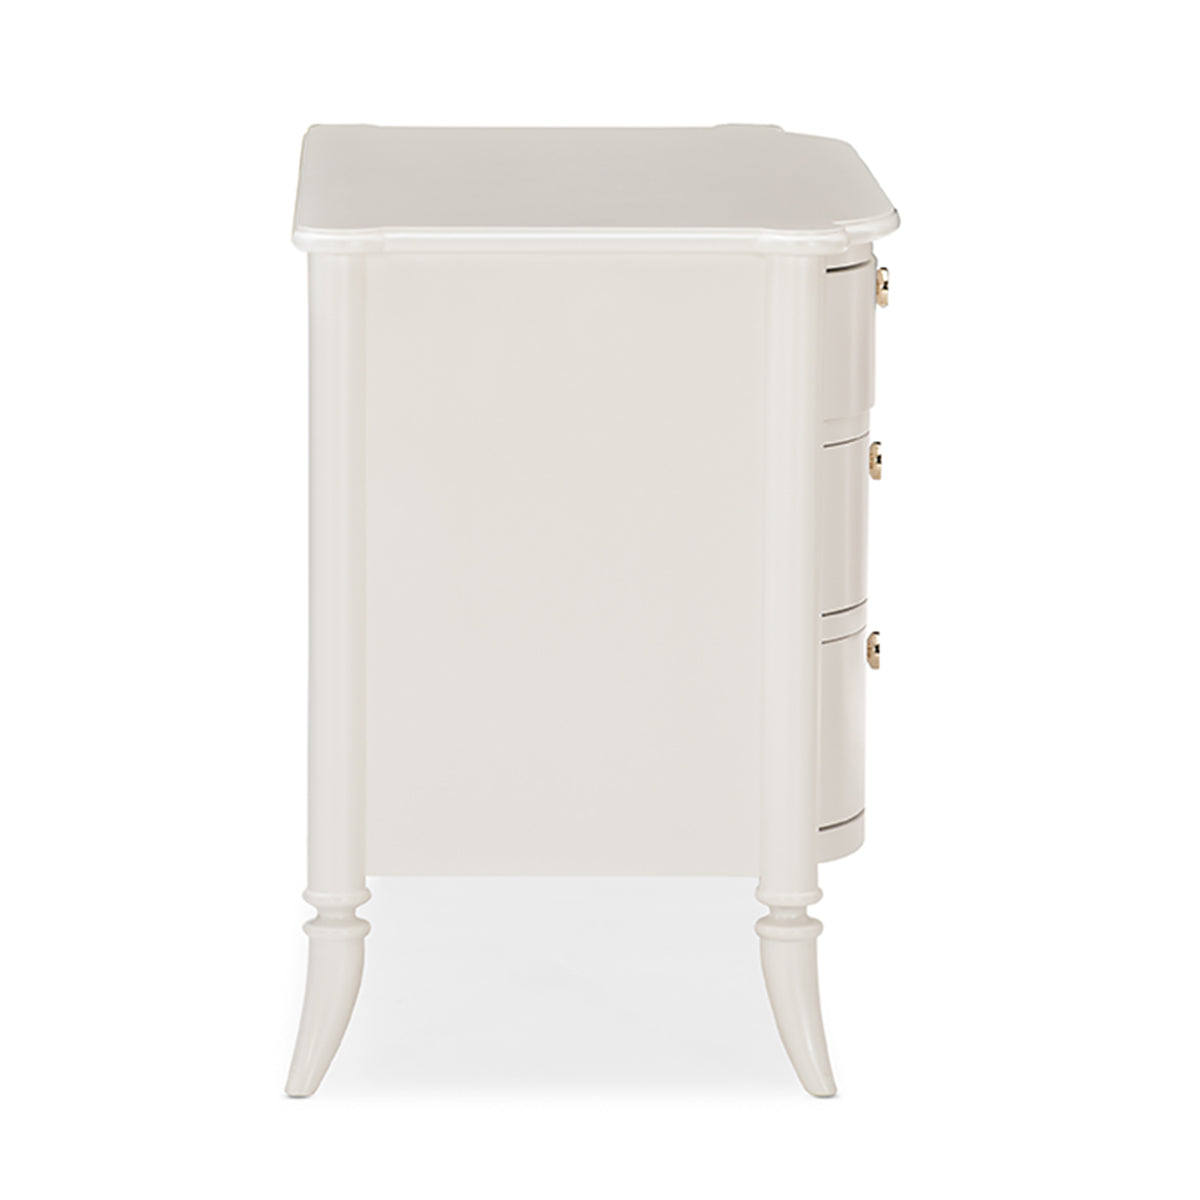 caracole oyster diver nightstands 